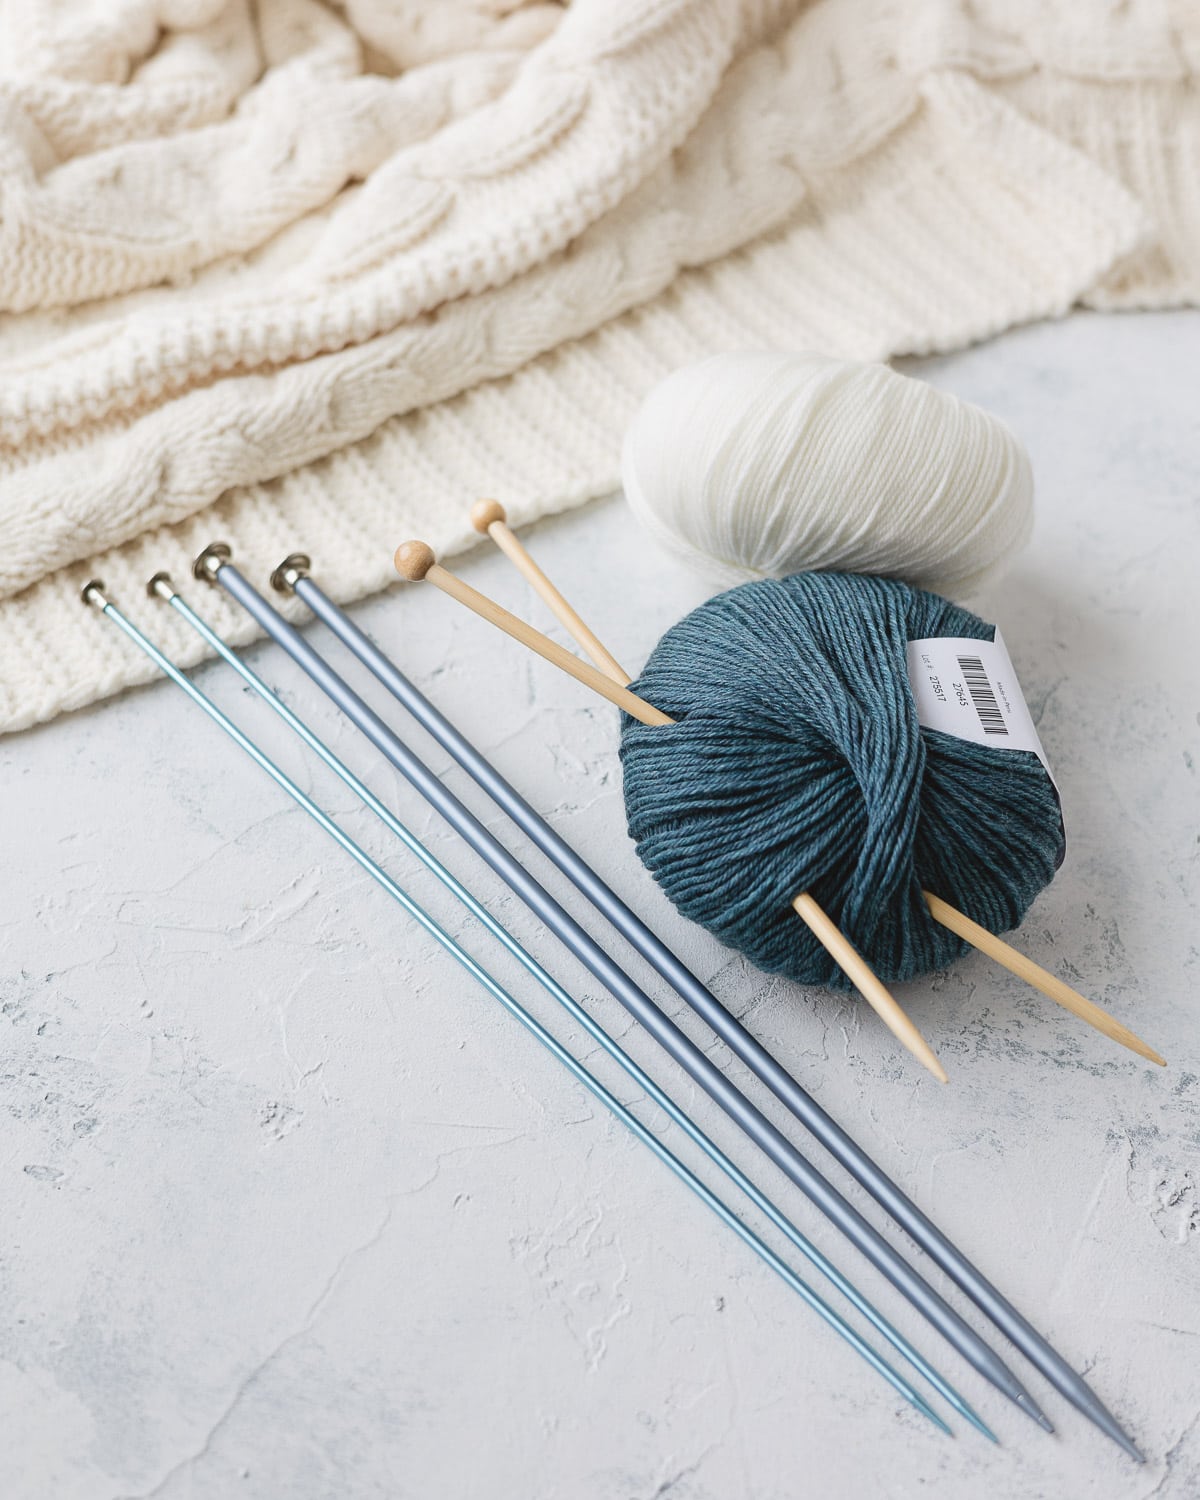 Straight wooden knitting needles in a ball of blue yarn with more straight needles nearby.